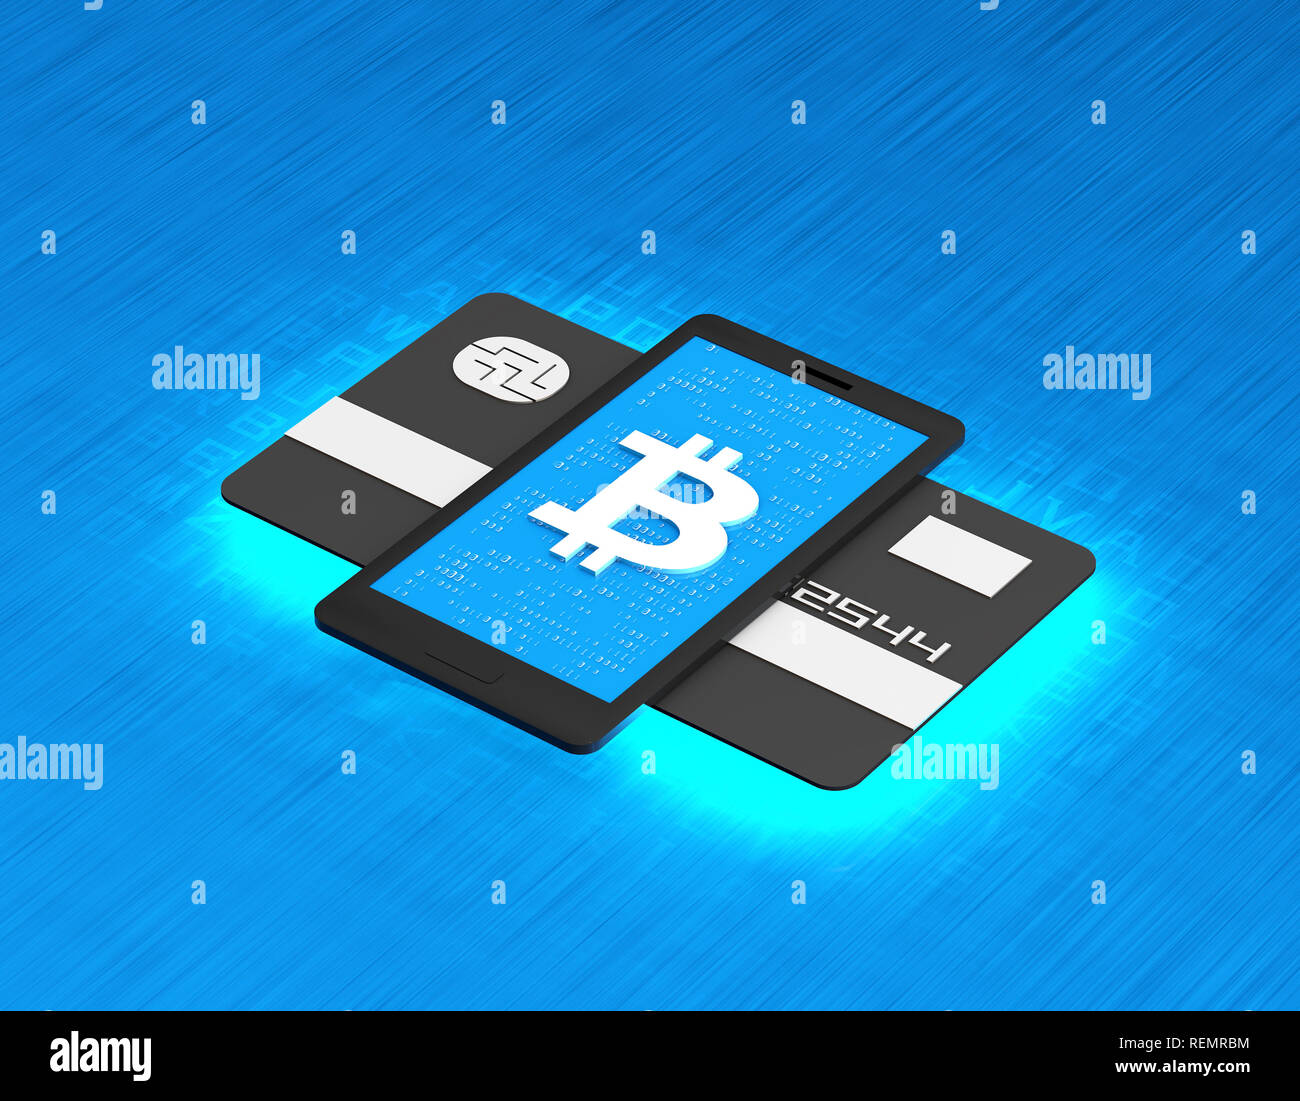 Wireless payment and financial transactions, mobile phone and bank card binding, currency symbols,bitcoin Stock Photo